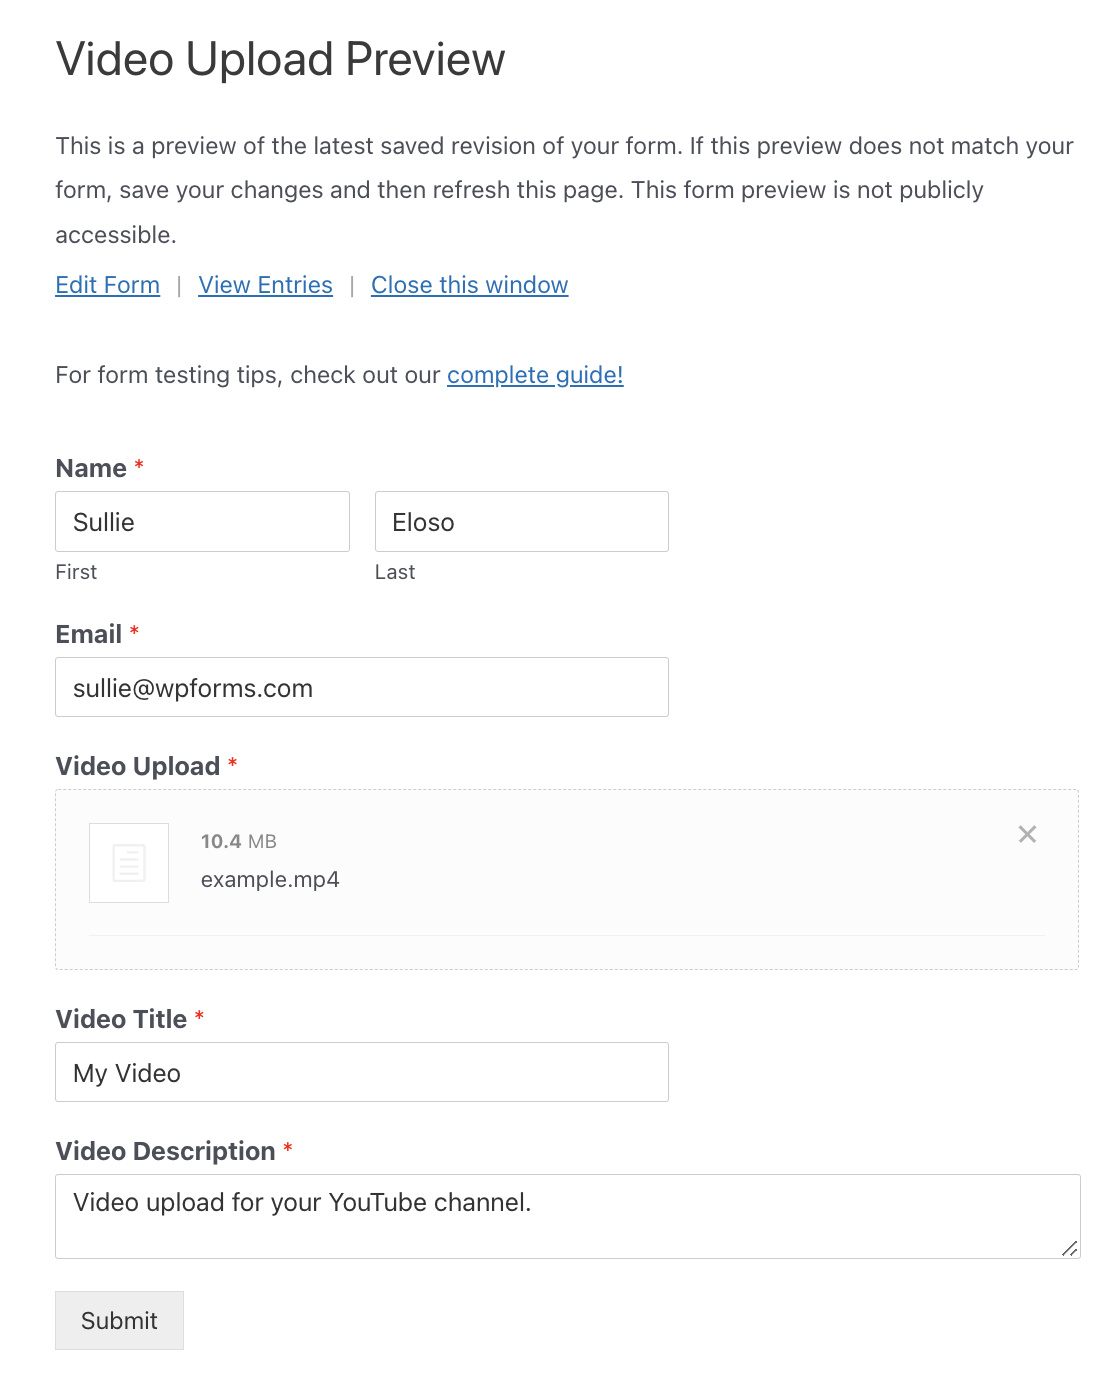 Creating a test entry for a video upload form